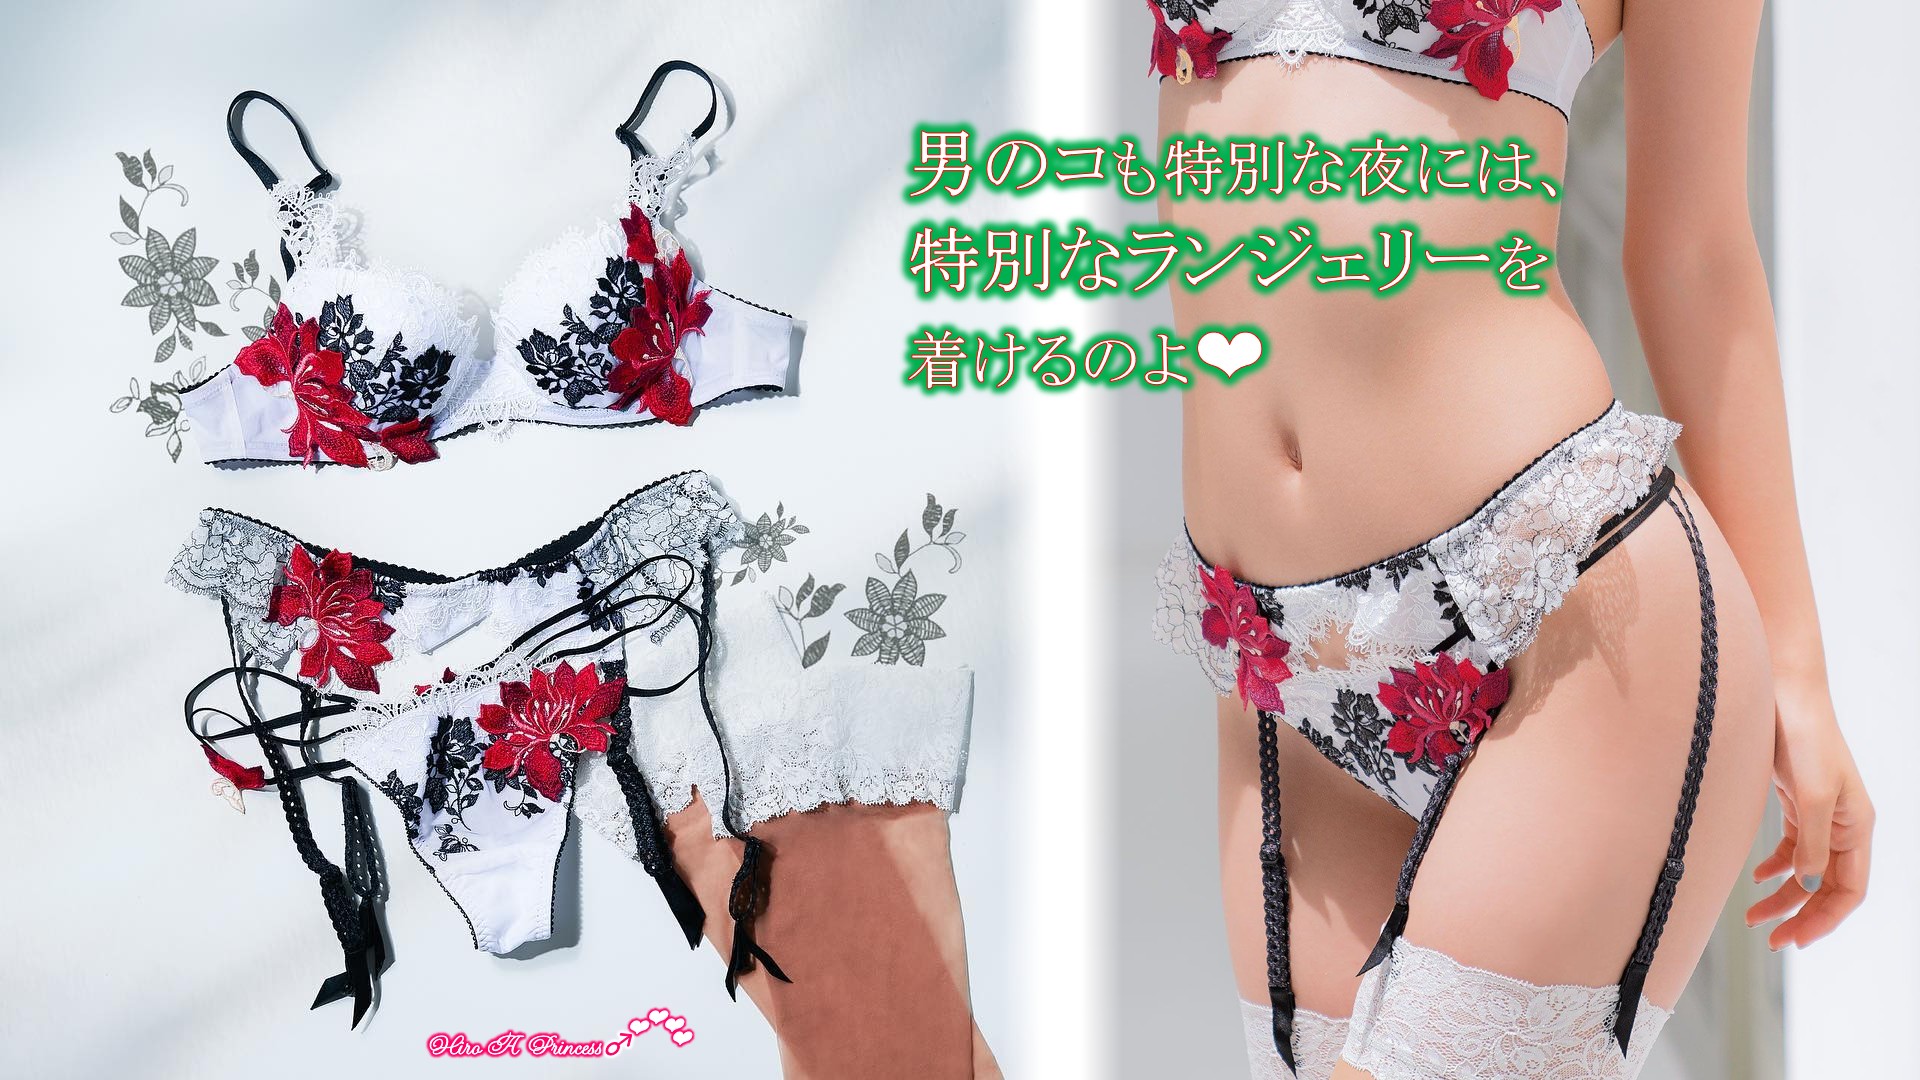 Boys also wear special Lingerie on special nights JJ